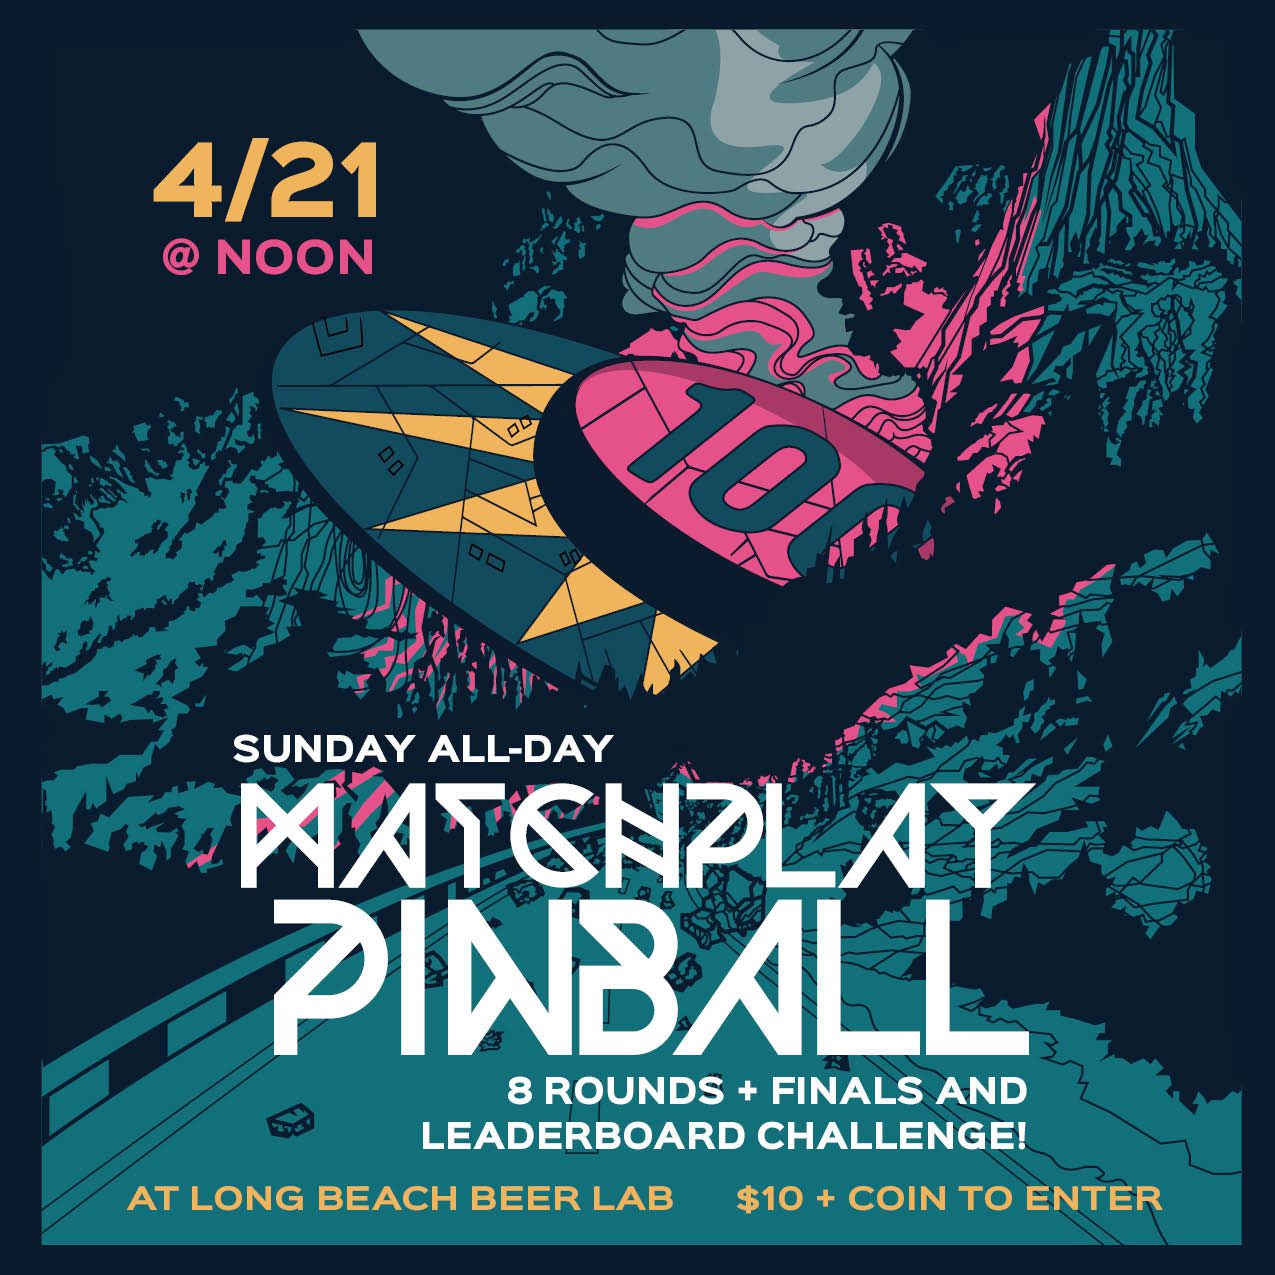 MatchPlay Sunday April 21st + The “TAKE ME TO YOUR LEADERBOARD” Challenge